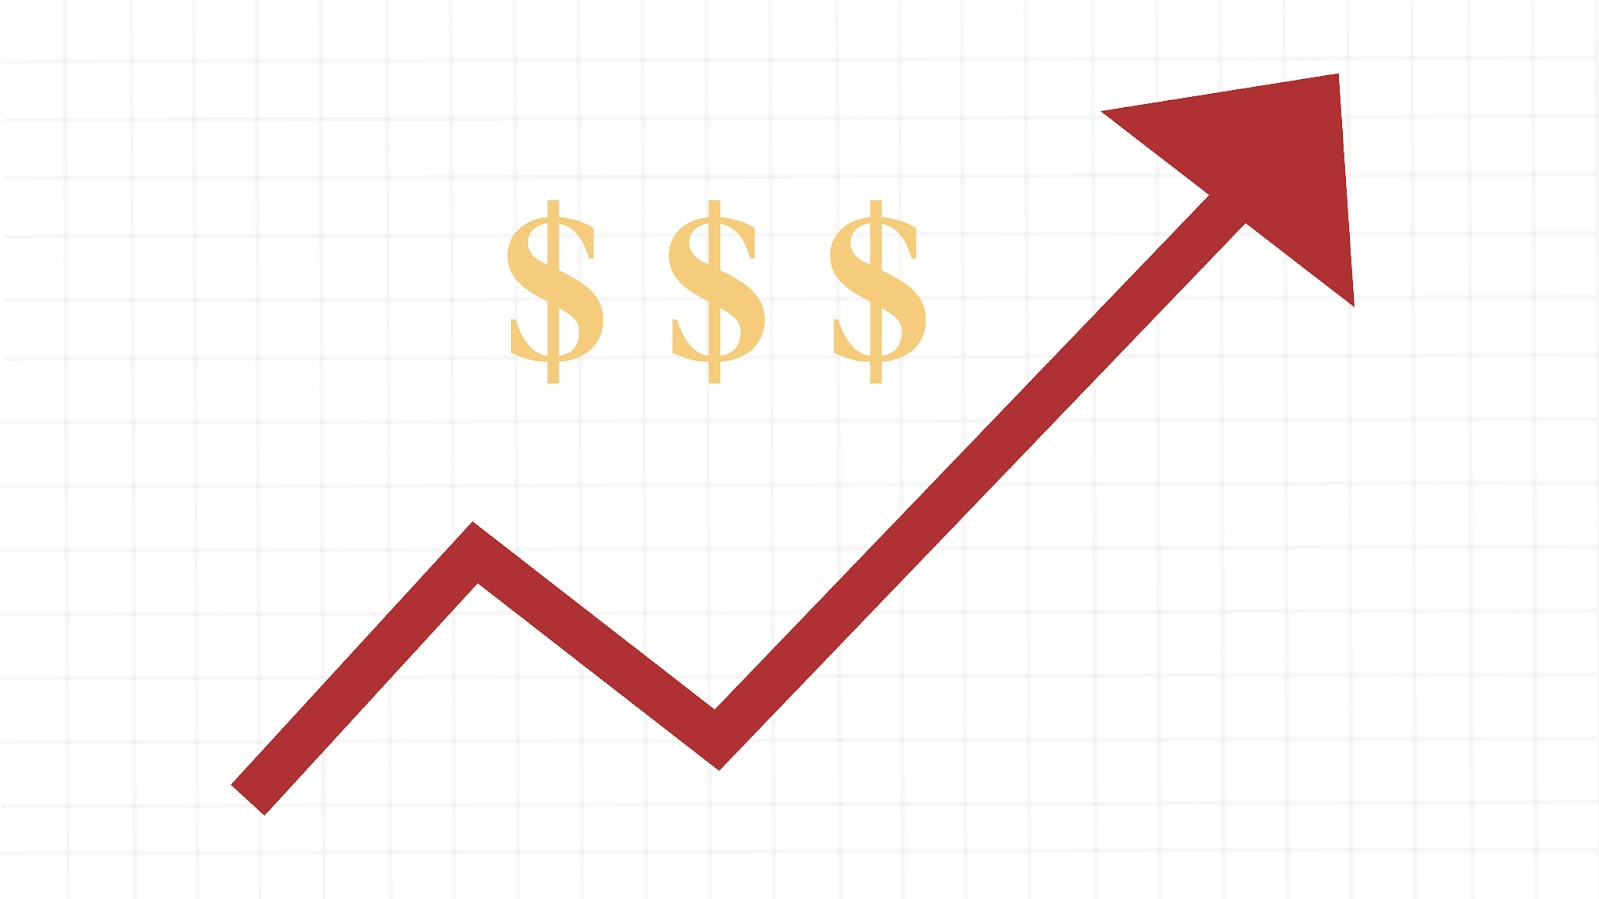 Arrow on a graph pointing upwards, with dollar signs indicating a rise in tuition.